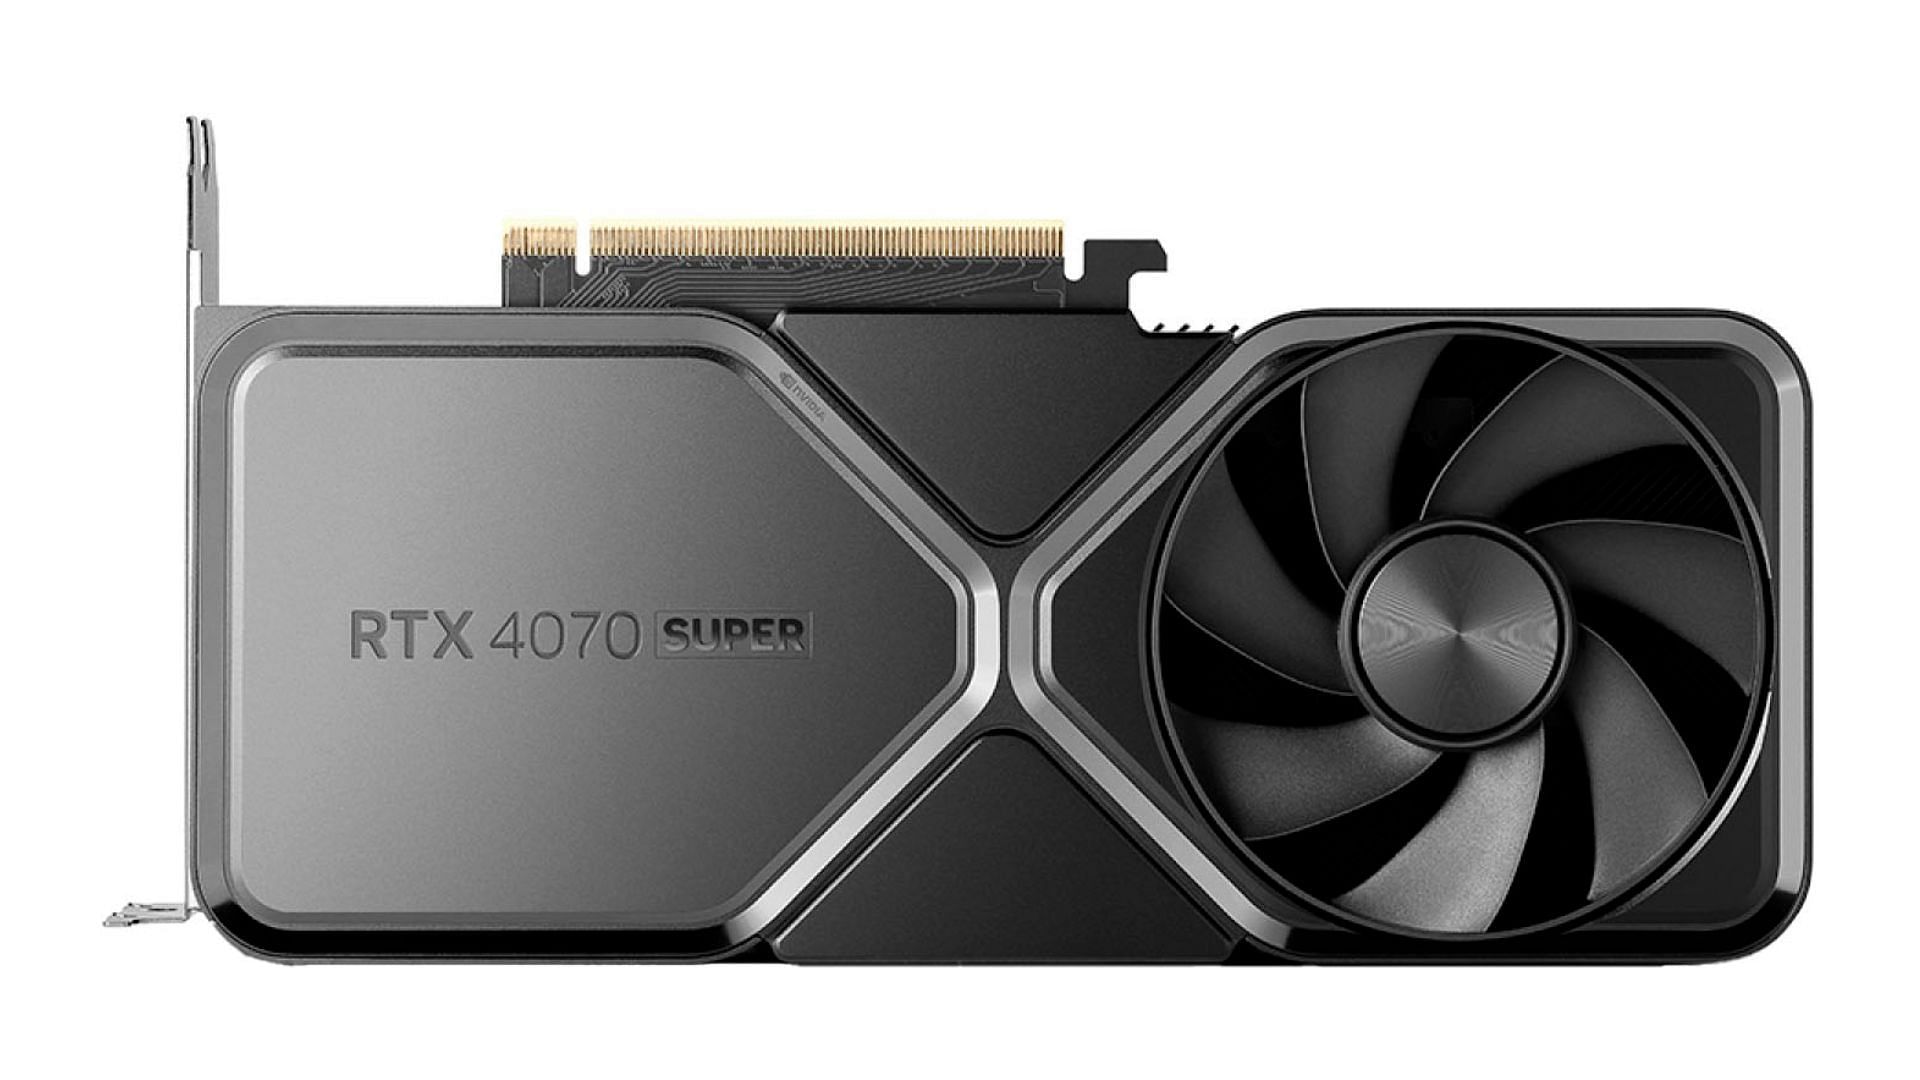 The RTX 4070 Super is a powerful 1440p gaming GPU (Image via Best Buy)